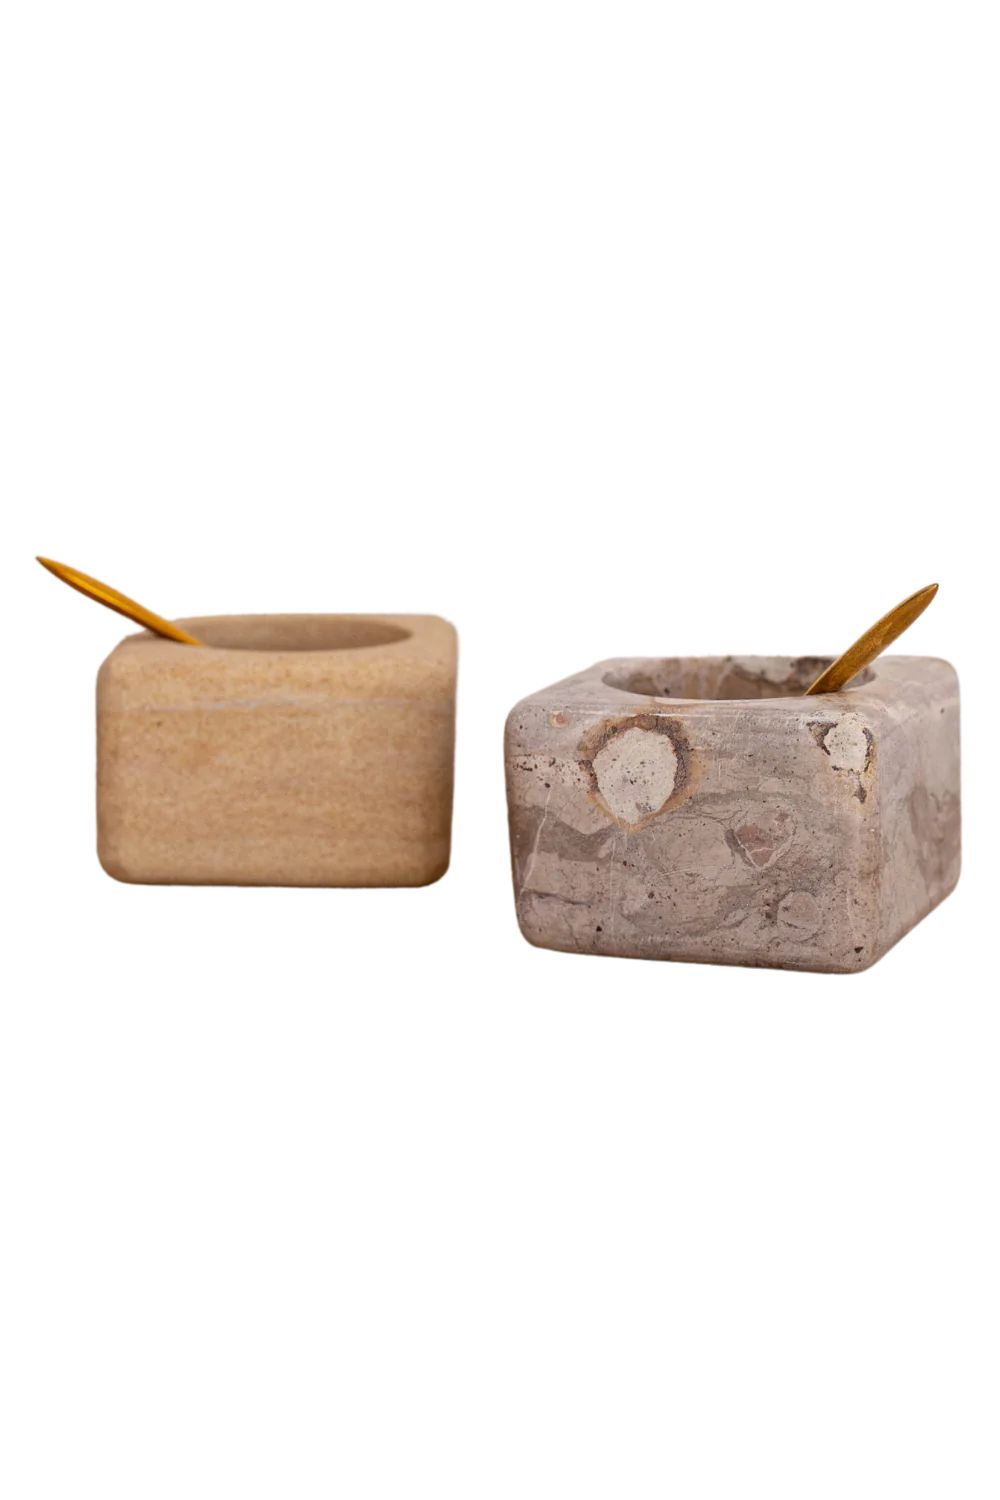 MARBLE & SANDSTONE PINCH POT | Luxe B Co